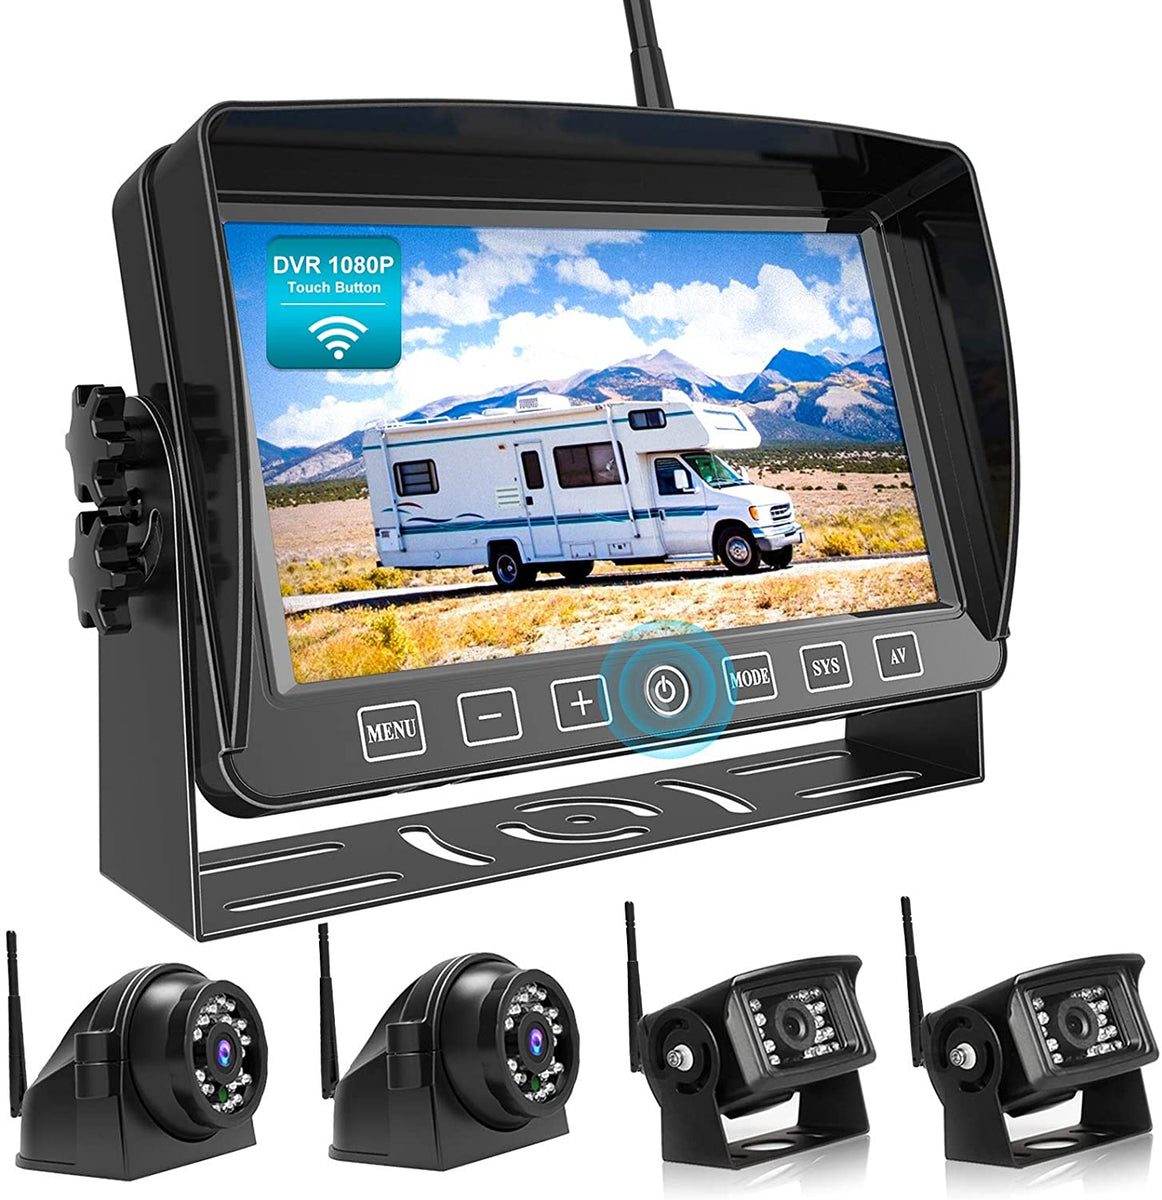 Fookoo 1080P Wireless Backup Camera System Kit with Recording, 7